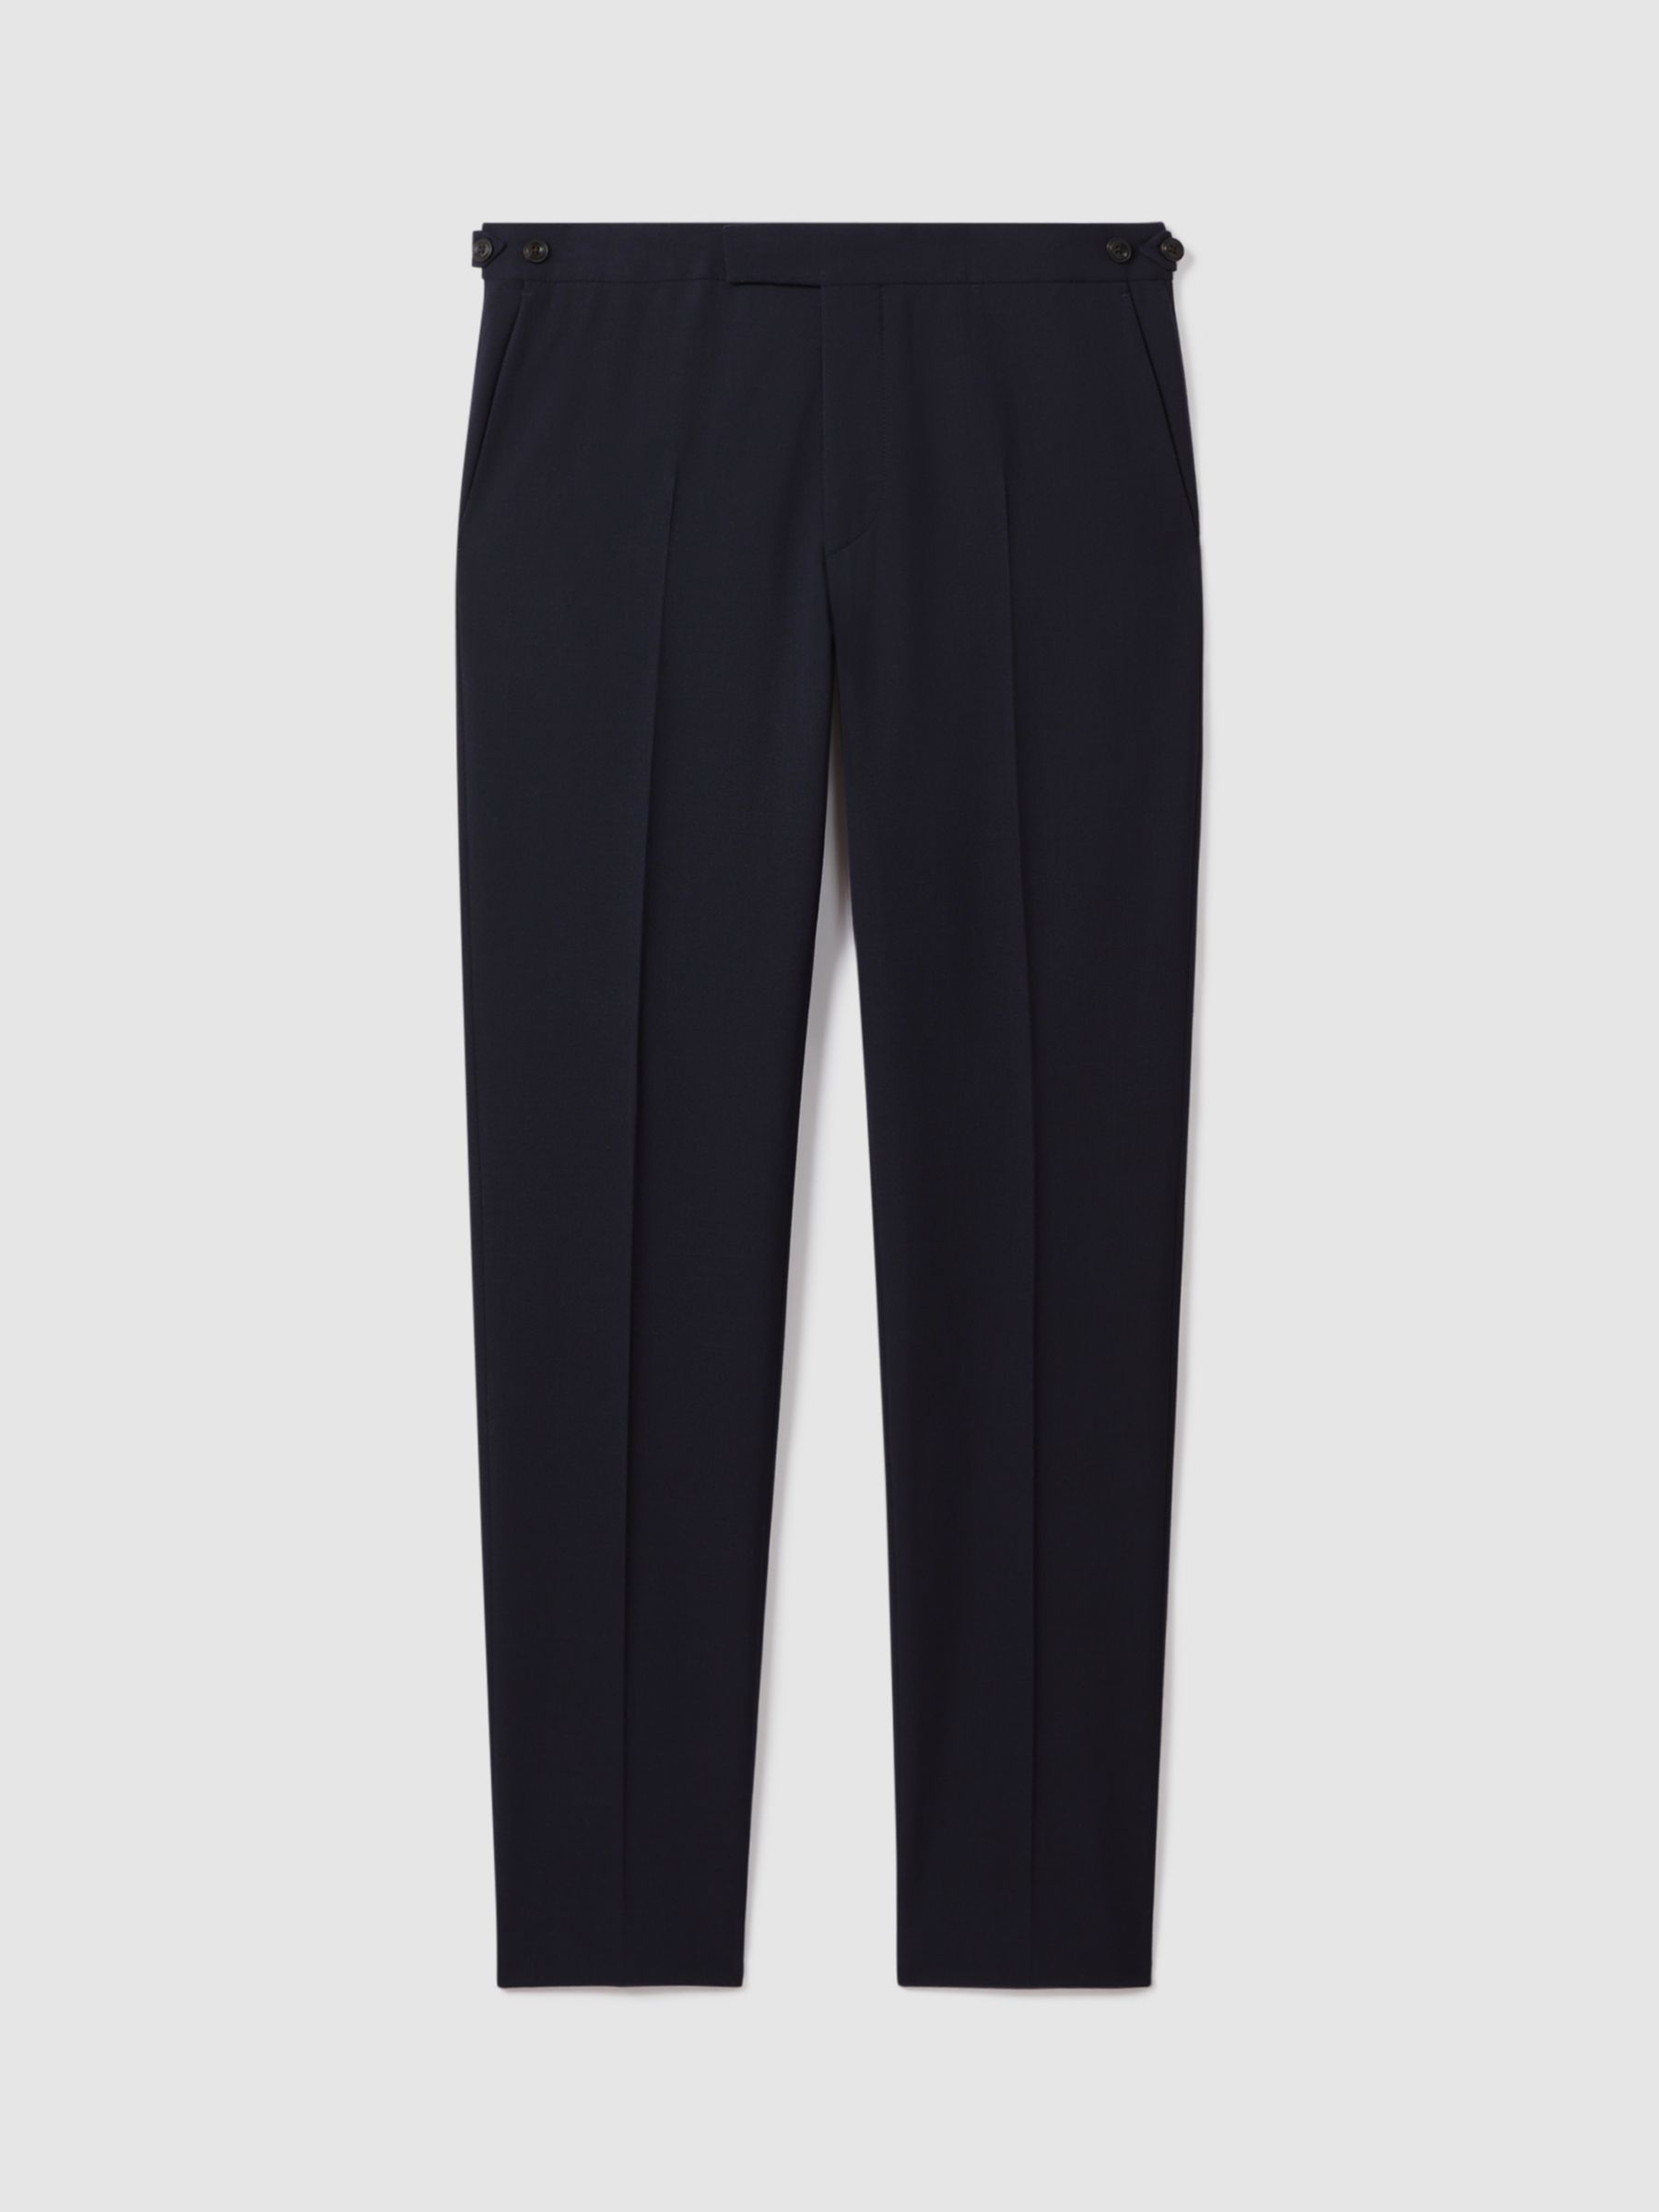 Reiss Belmont Textured Trousers, Navy, 38R